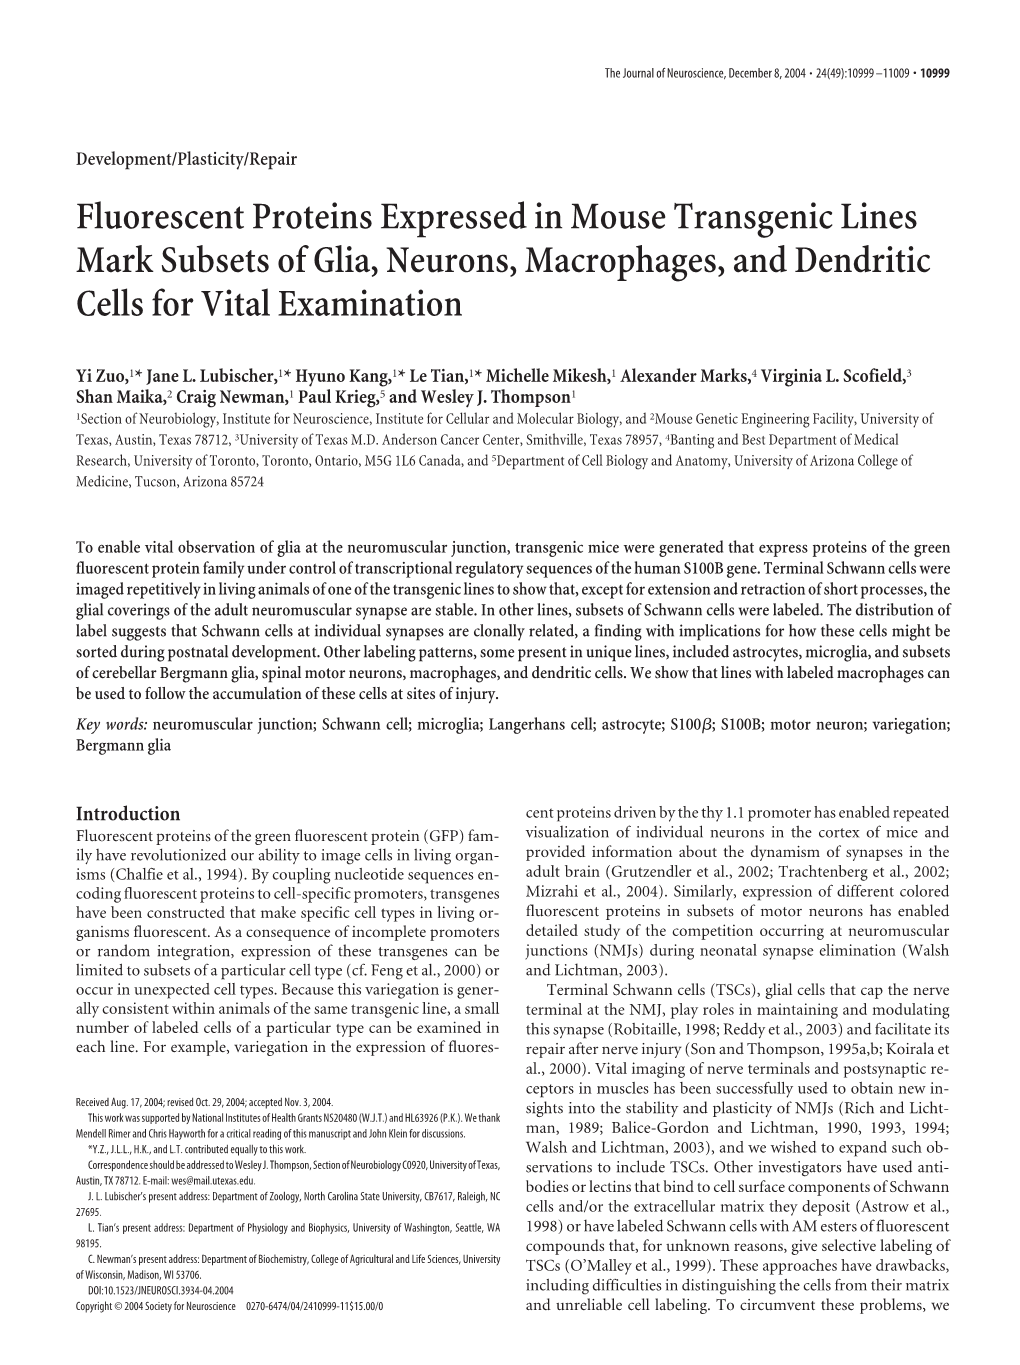 Fluorescent Proteins Expressed in Mouse Transgenic Lines Mark Subsets of Glia, Neurons, Macrophages, and Dendritic Cells for Vital Examination